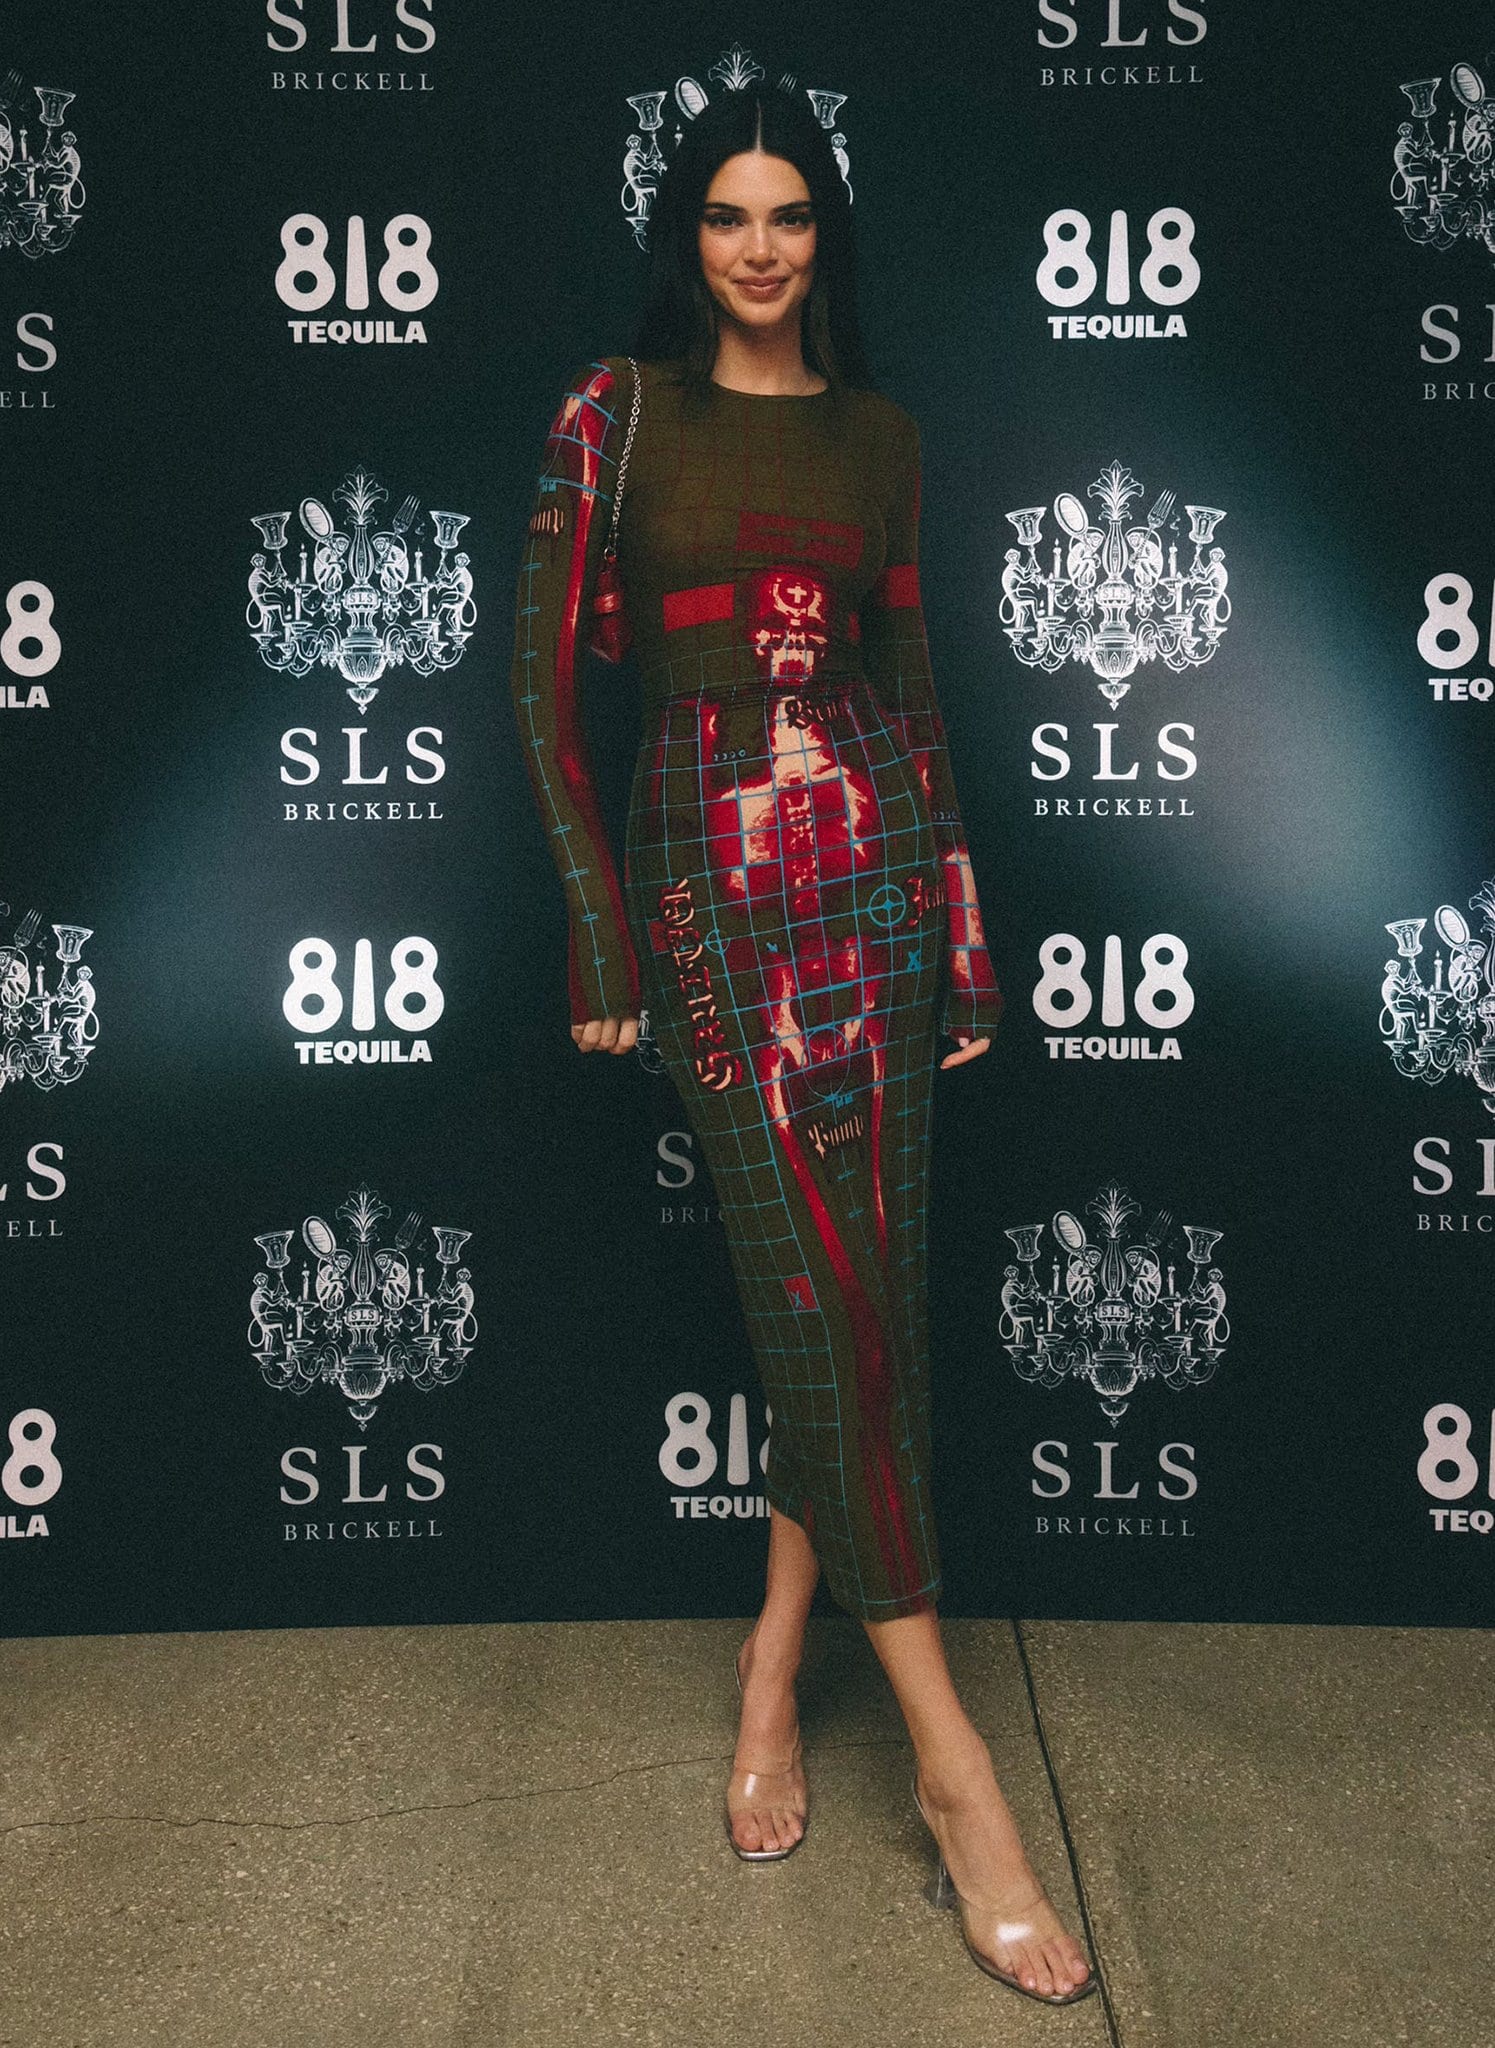 Kendall Jenner promotes 818 Tequila at Miami’s SLS Brickell hotel as part of the Miami Art Week on December 5, 2021